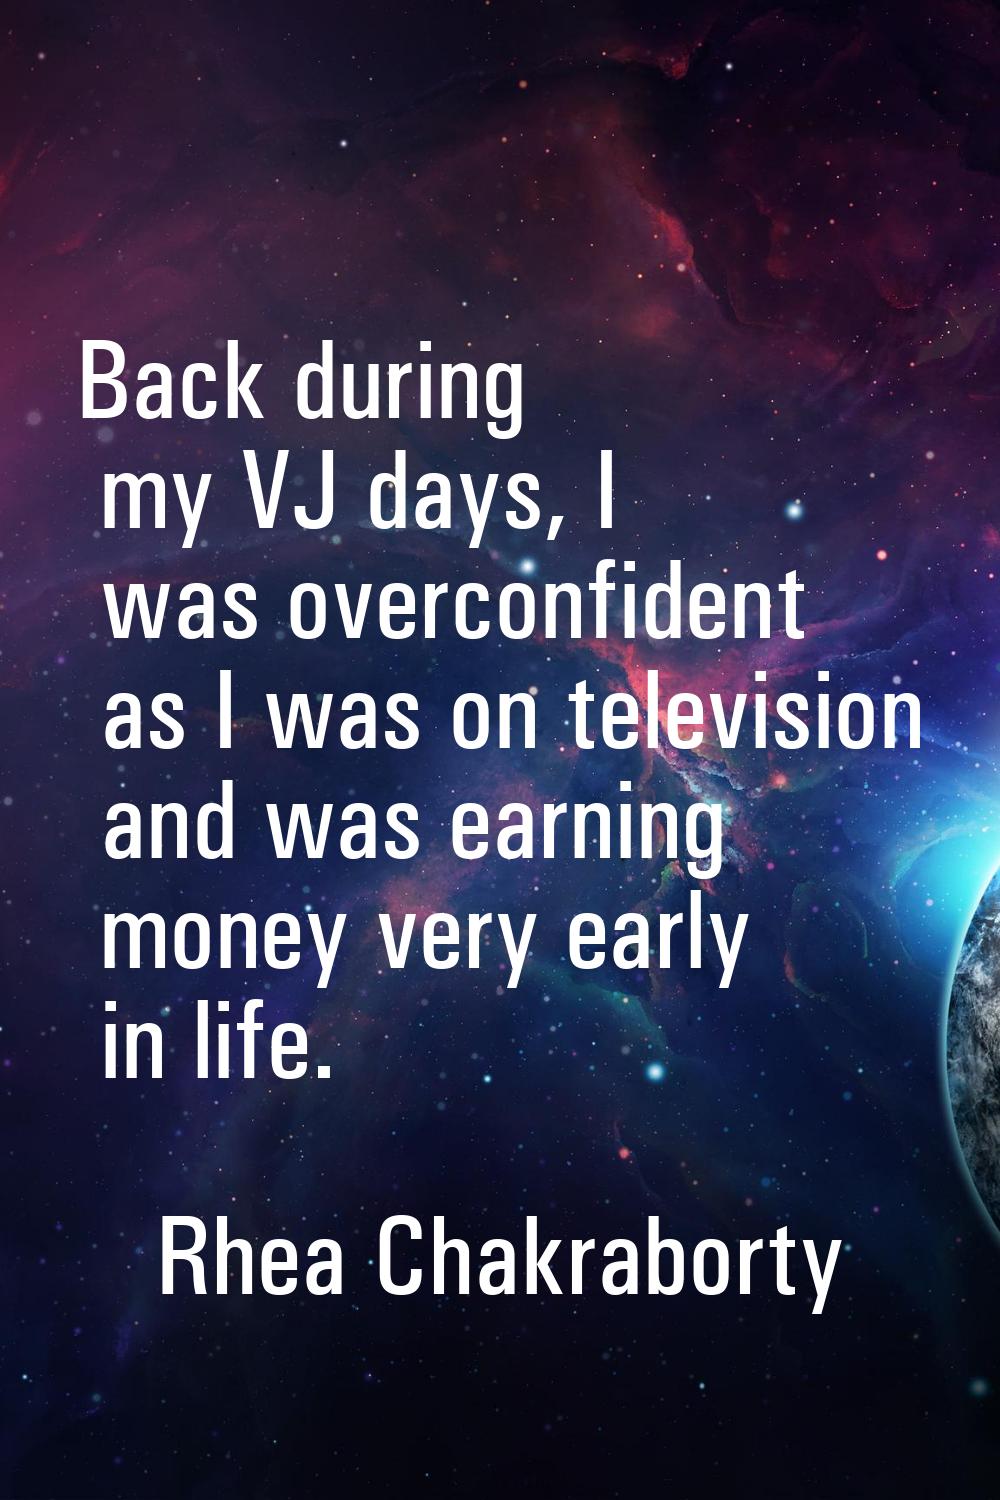 Back during my VJ days, I was overconfident as I was on television and was earning money very early